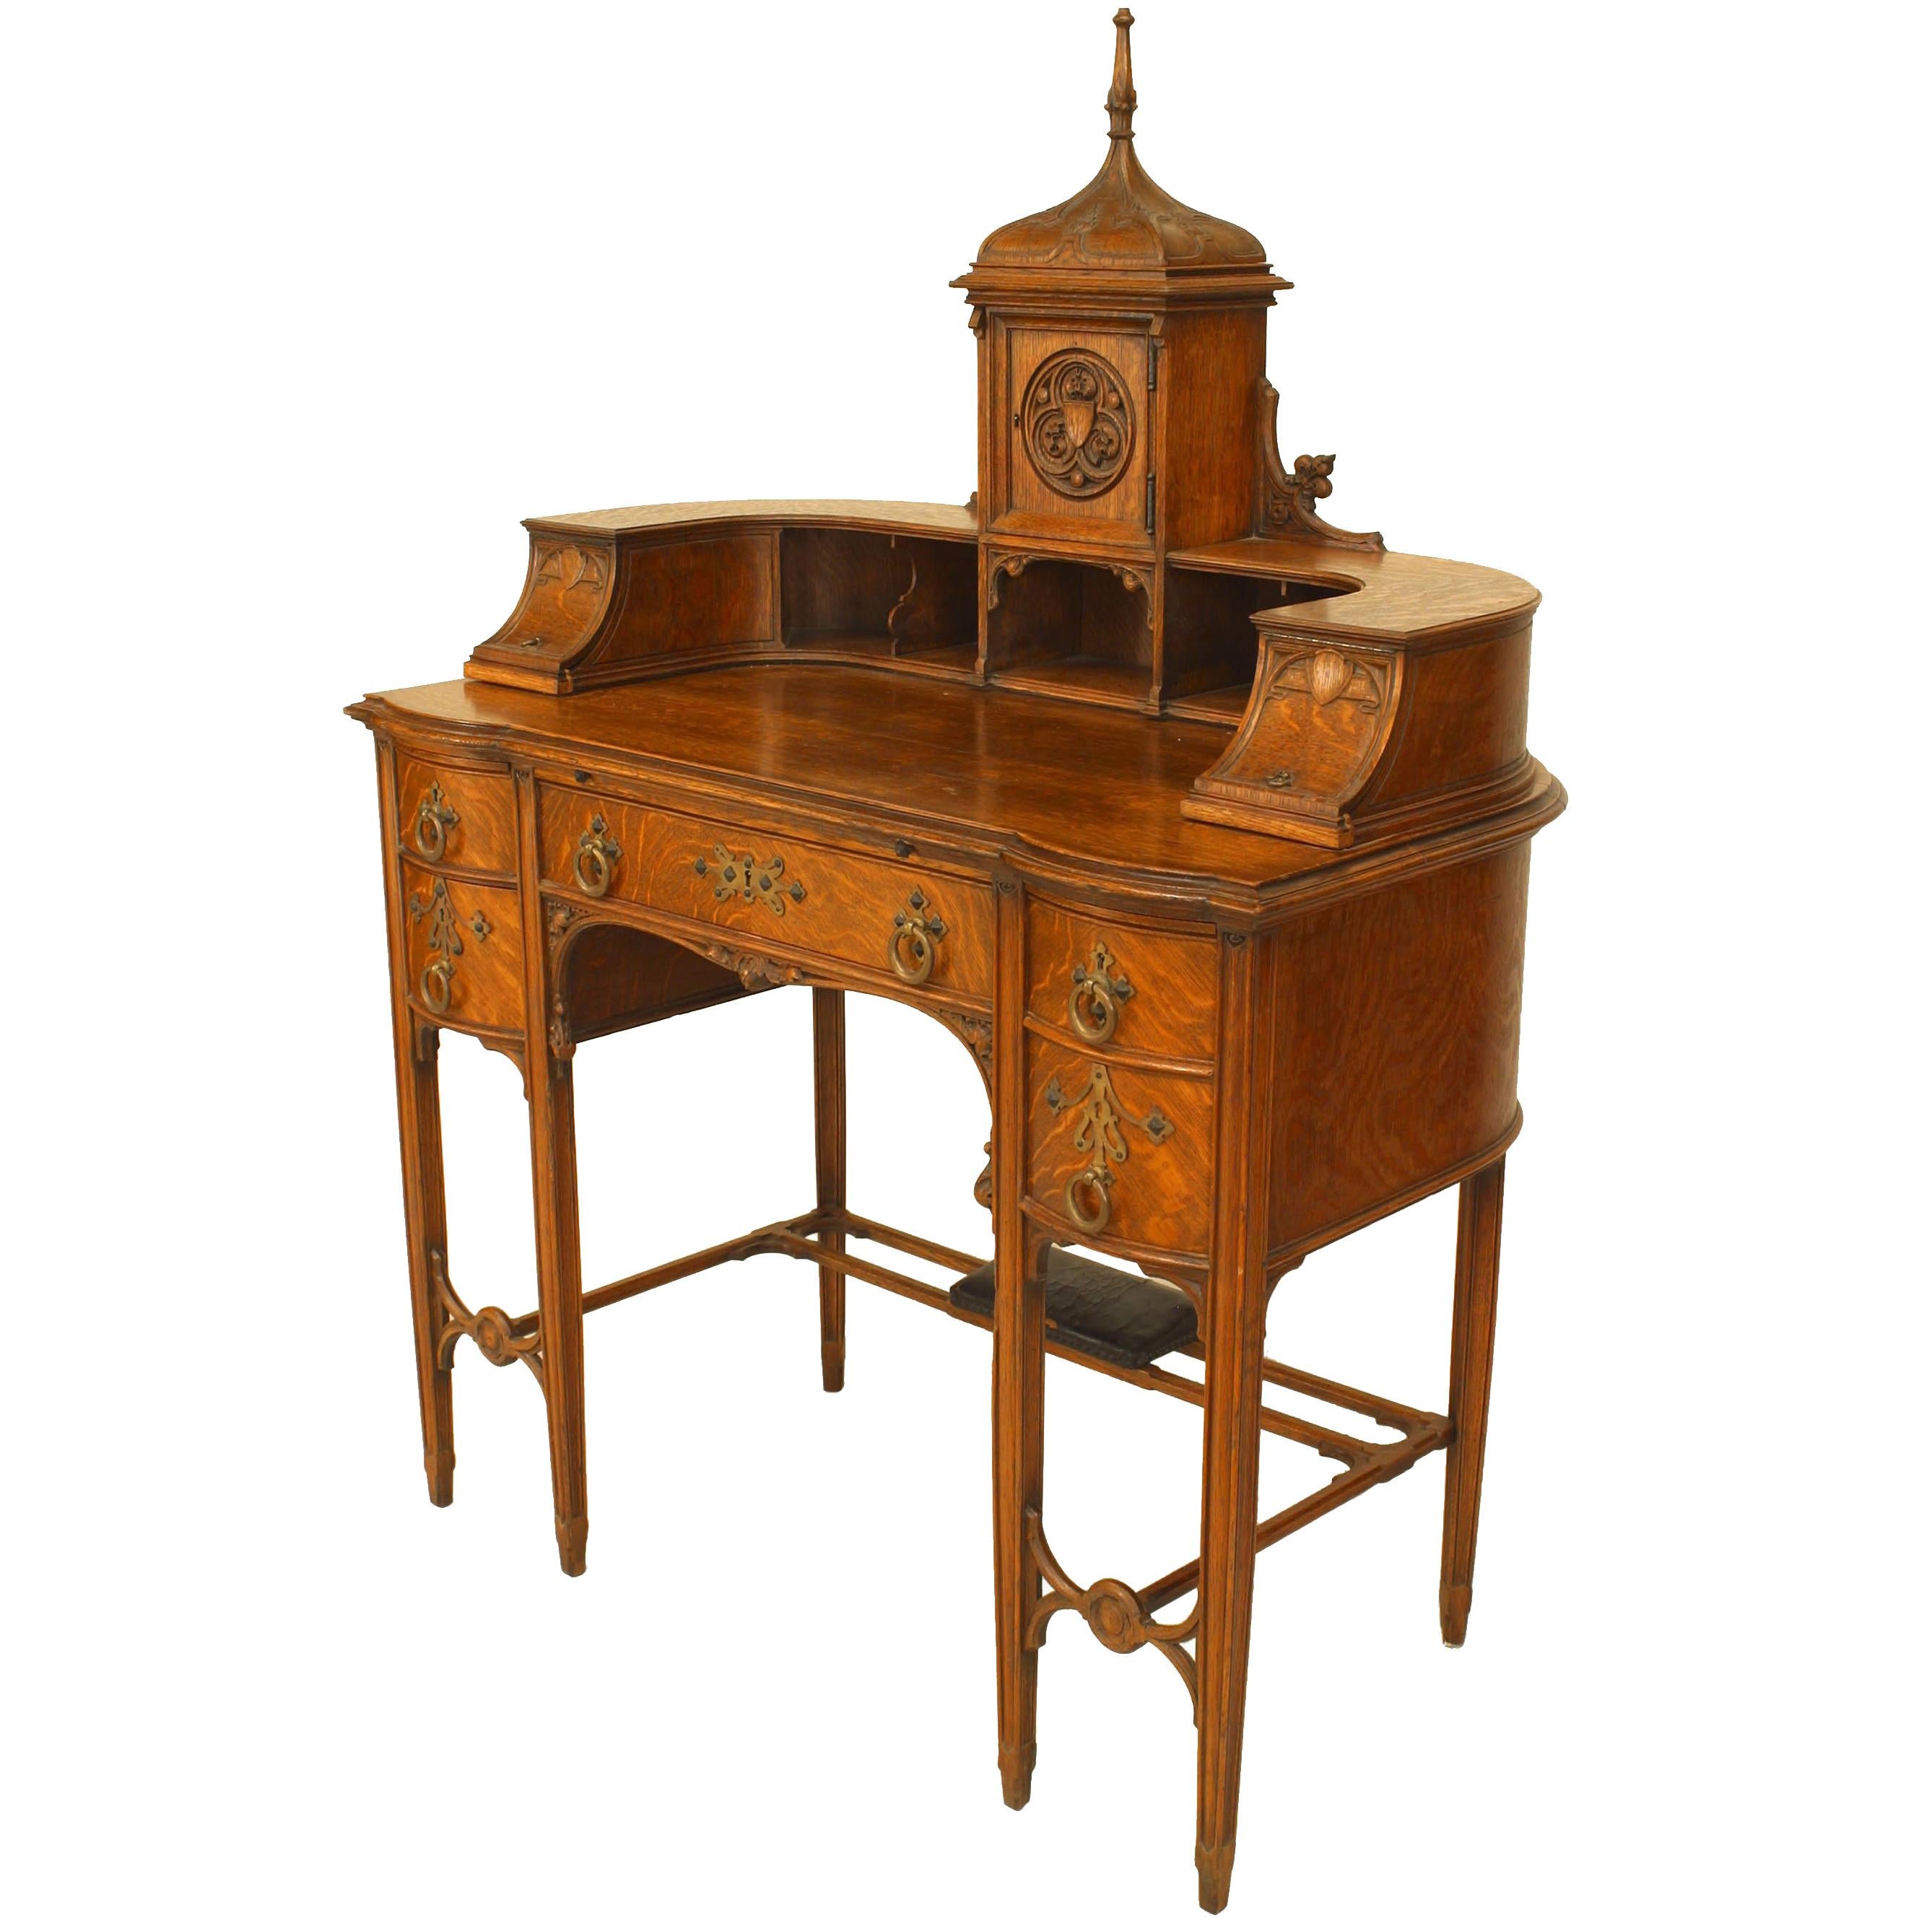 American Victorian Gothic Revival "Carlton House" Desk For Sale